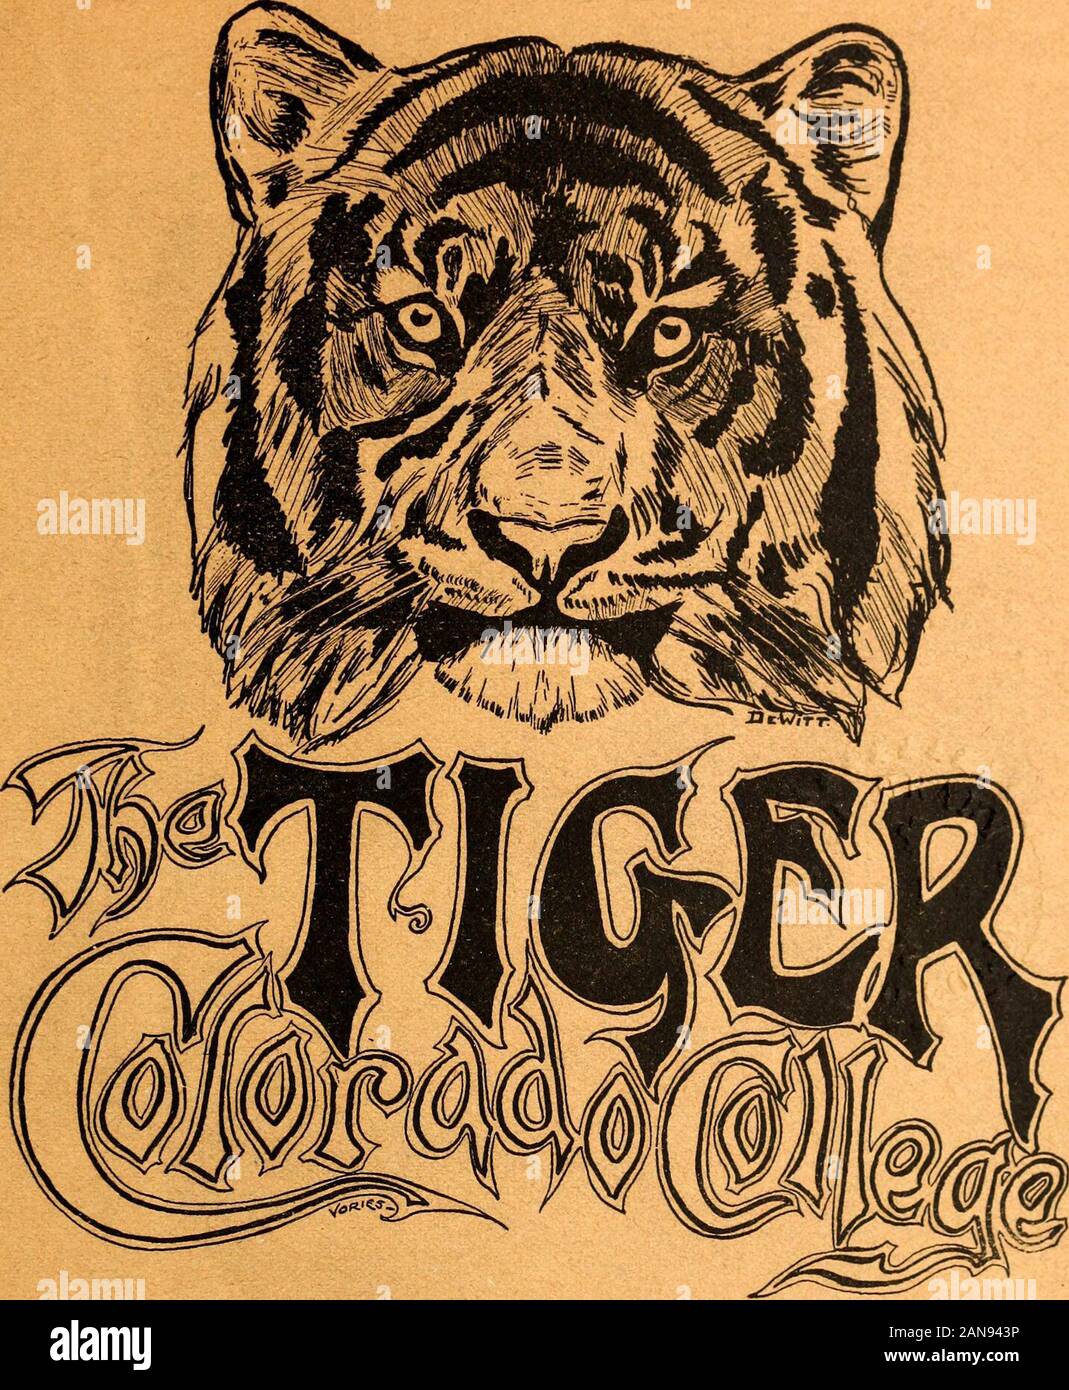 The Tiger (student newspaper), Sept1903-June 1904 . September 16 1903 Volume VI Numbei 1 ?milll »»«»|4»»»»M4H,H4«44^ *; I Special Rates to Students ON RENTED PIANOS i THE KNIGHT-CAMPBELL Music Company NEW LENNOX BLOCK OPPOSITE NORTH PARK St.JohnBros.rCT,CALPLUMBERS GAS cAND STEAM FITTERS Hot Water Heating a Specialty Prompt attention given to Repair Work. Curtis Soal 6o. Office, 132 N. Tejon Street. Telephone 91 Try NEW RANGE for the Kitchen, $4.00. BITUMNOUS COAL AT STANDARD PRICES. ; SELDMONRIDGE BROTHERS Wholesale and Retail Dealers in I Flour, Feed, Grain, Hay and Seeds108 South Tejon Stre Stock Photo